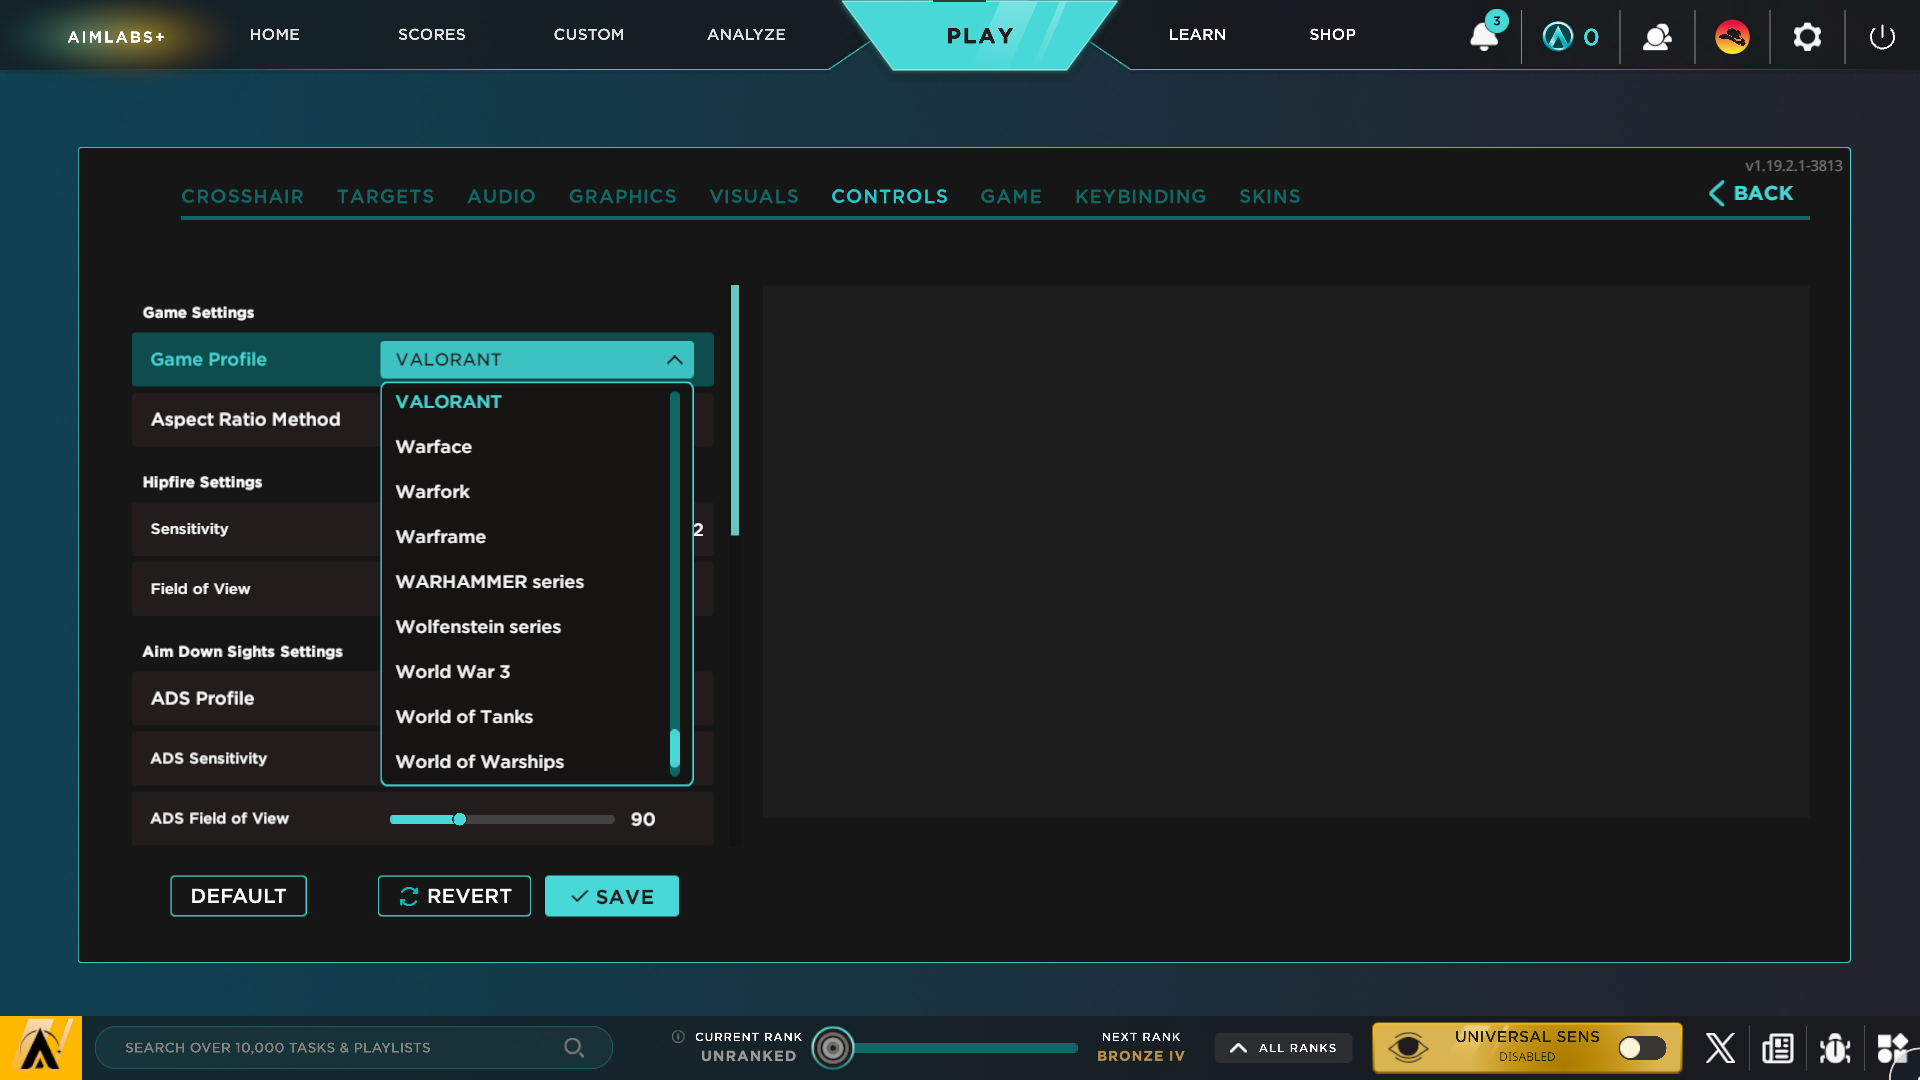 Aimlabs' "Controls" page with the game profile set to Valorant.